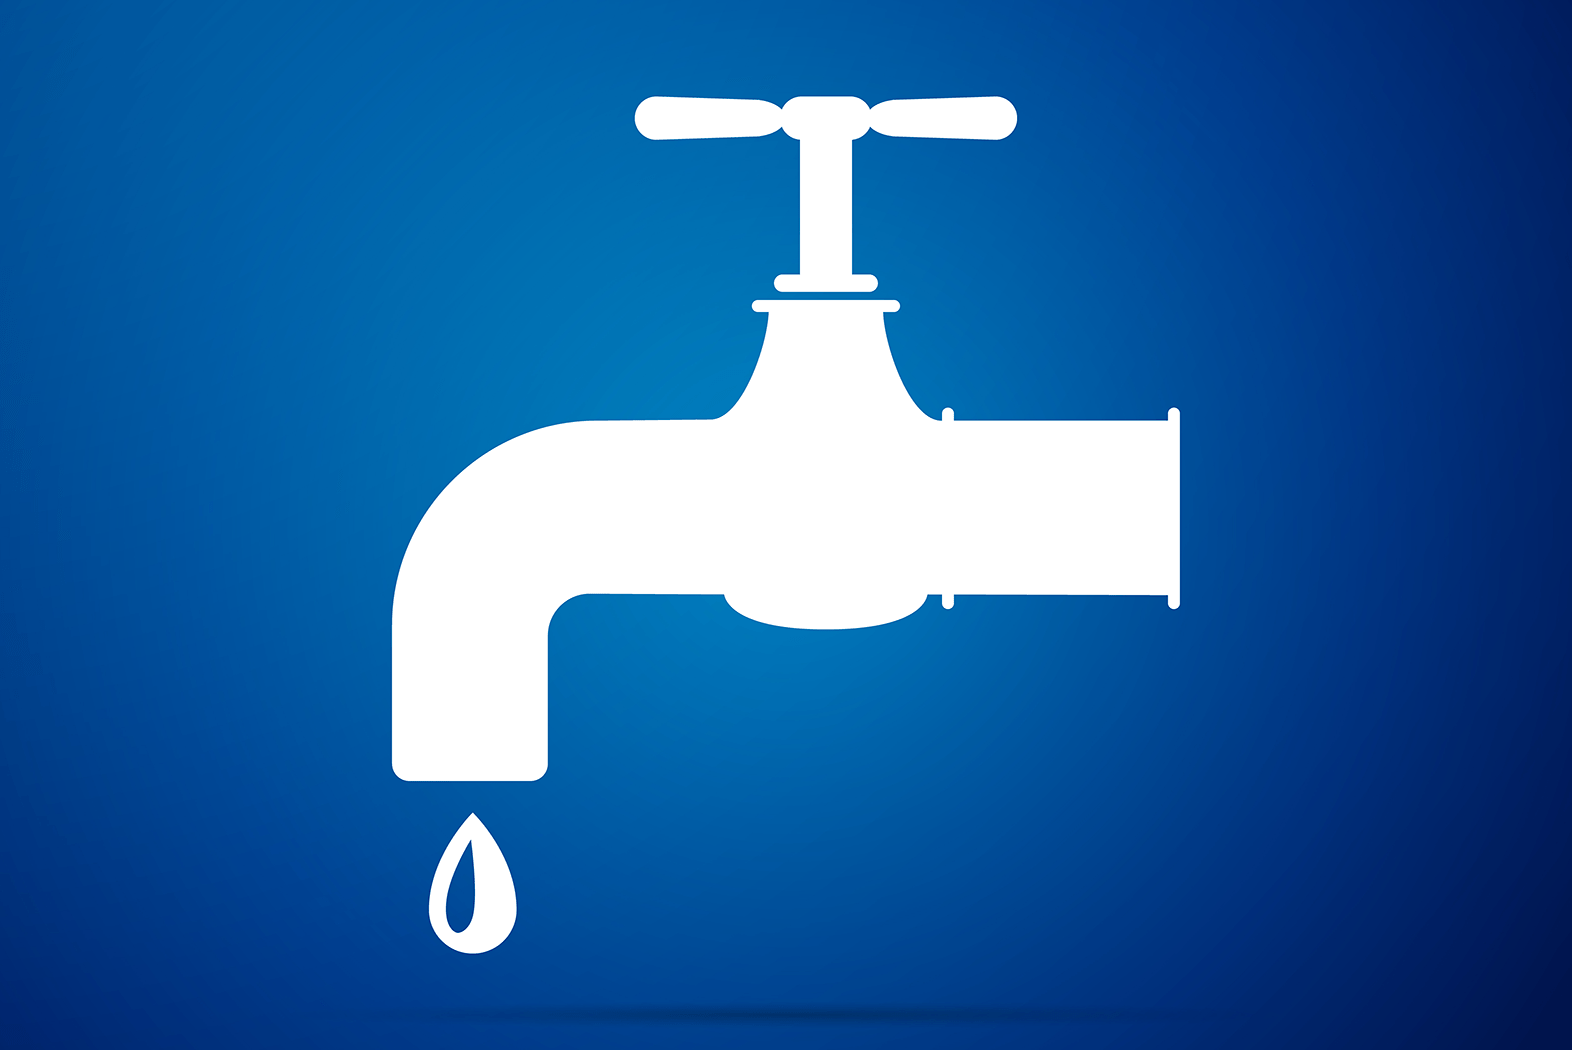 Leaky faucet icon